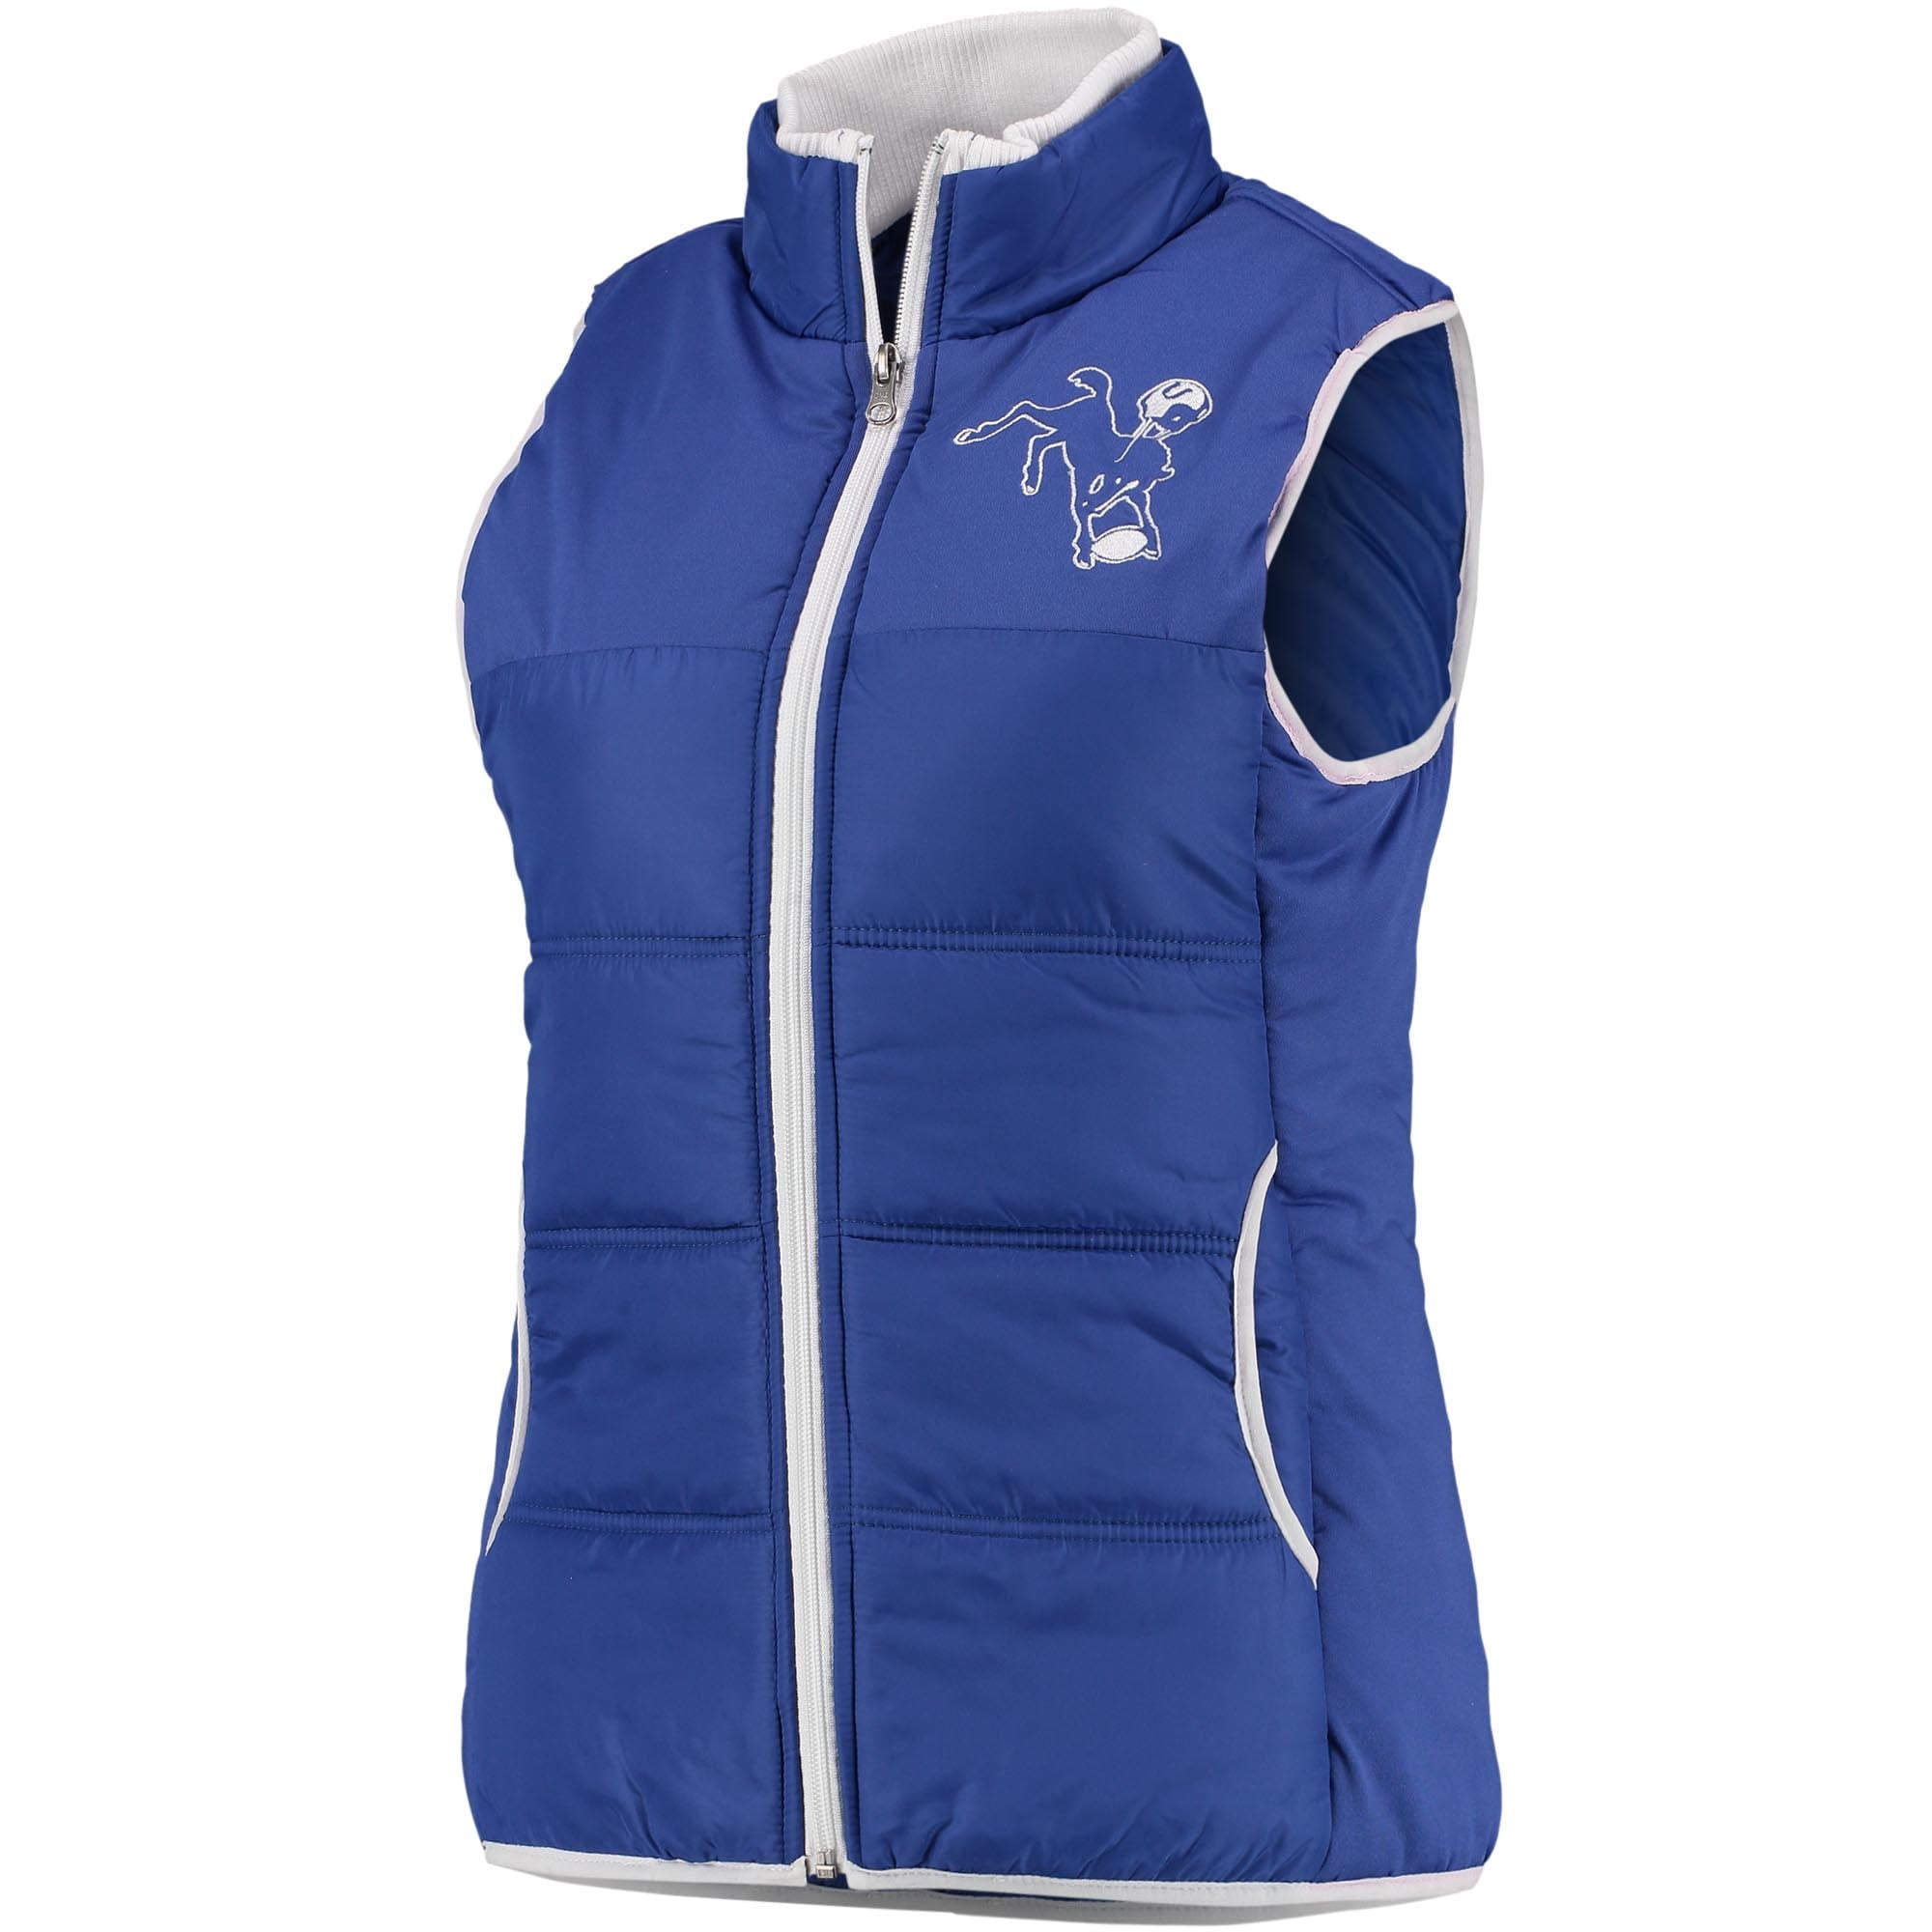 Nitro USA NCAA Women's Circle Quilted Vest with Rhinestone Power 